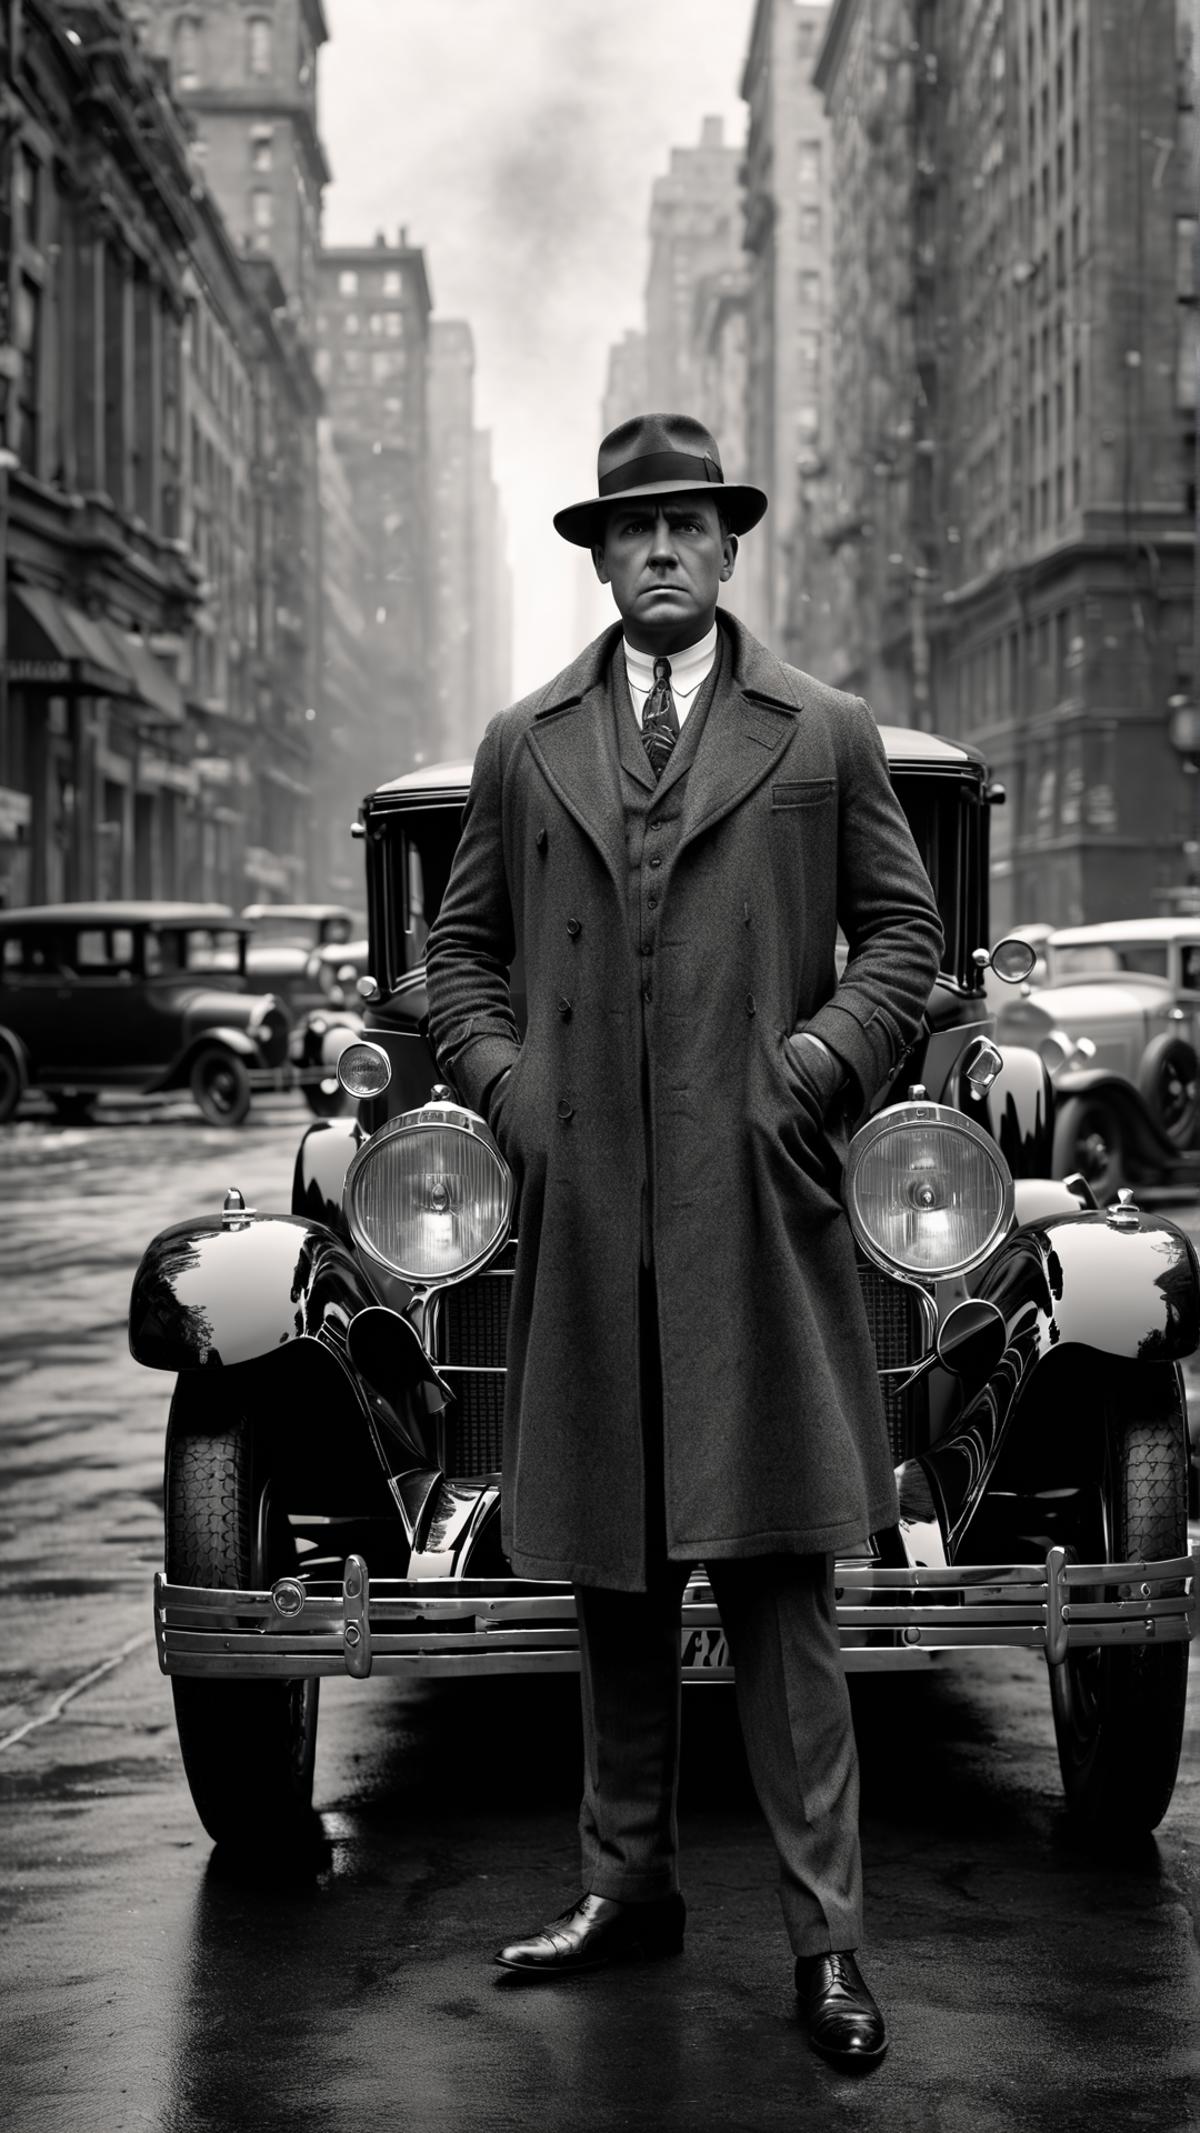 Man in a Long Coat Standing Next to a Classic Car in a Black and White Photo